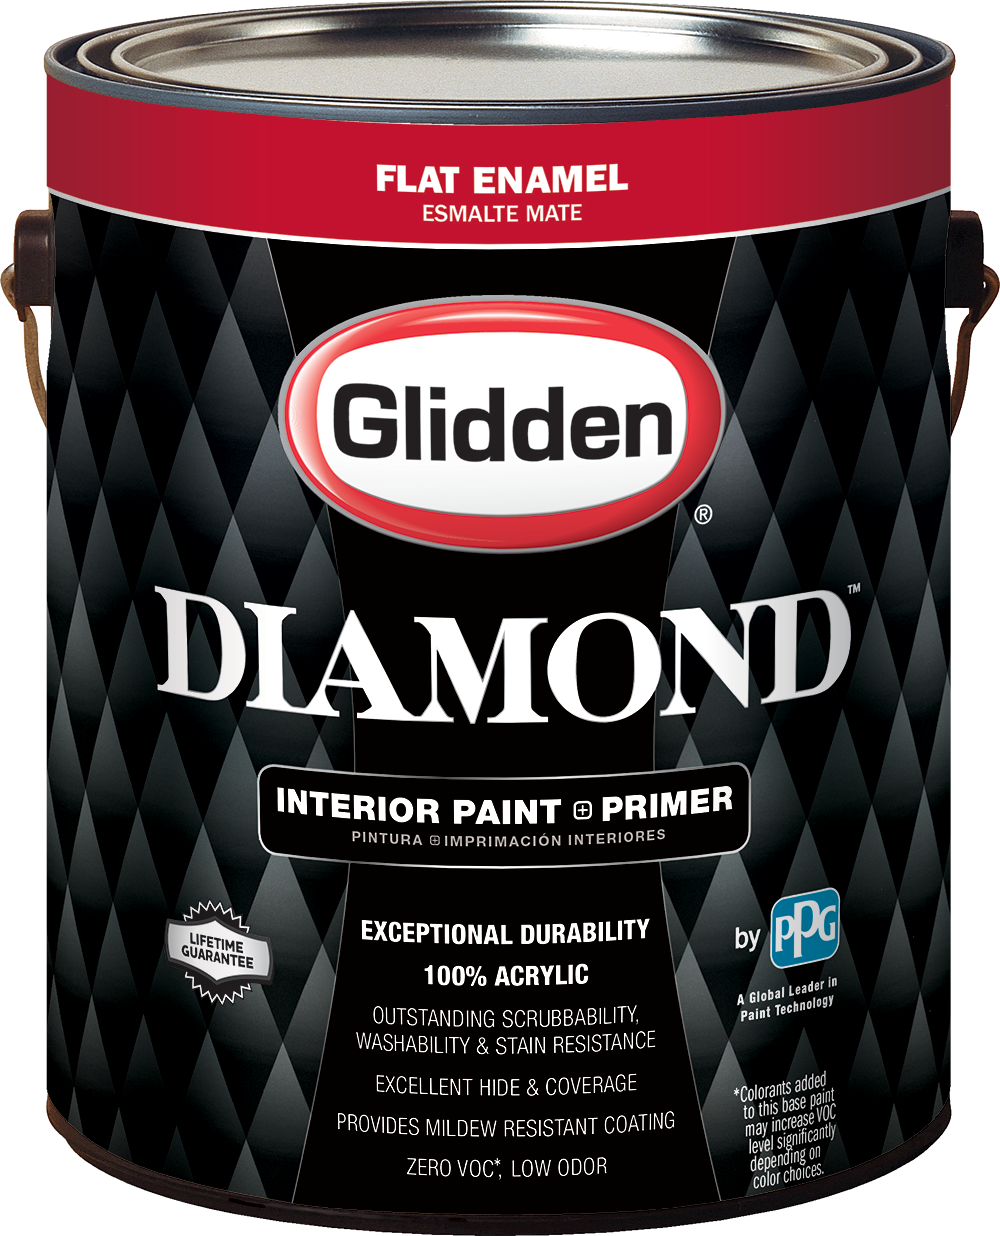 Diamond is an interior paint and primer that the company says delivers outstanding durability at an incredible value. The 100-percent-acrylic premium paint and primer in one saves painting contractors on application time and, because it costs less than $25, saves money, too. Low-odor and zero-VOC, it’s available in flat enamel, eggshell, semi-gloss, and satin finishes.